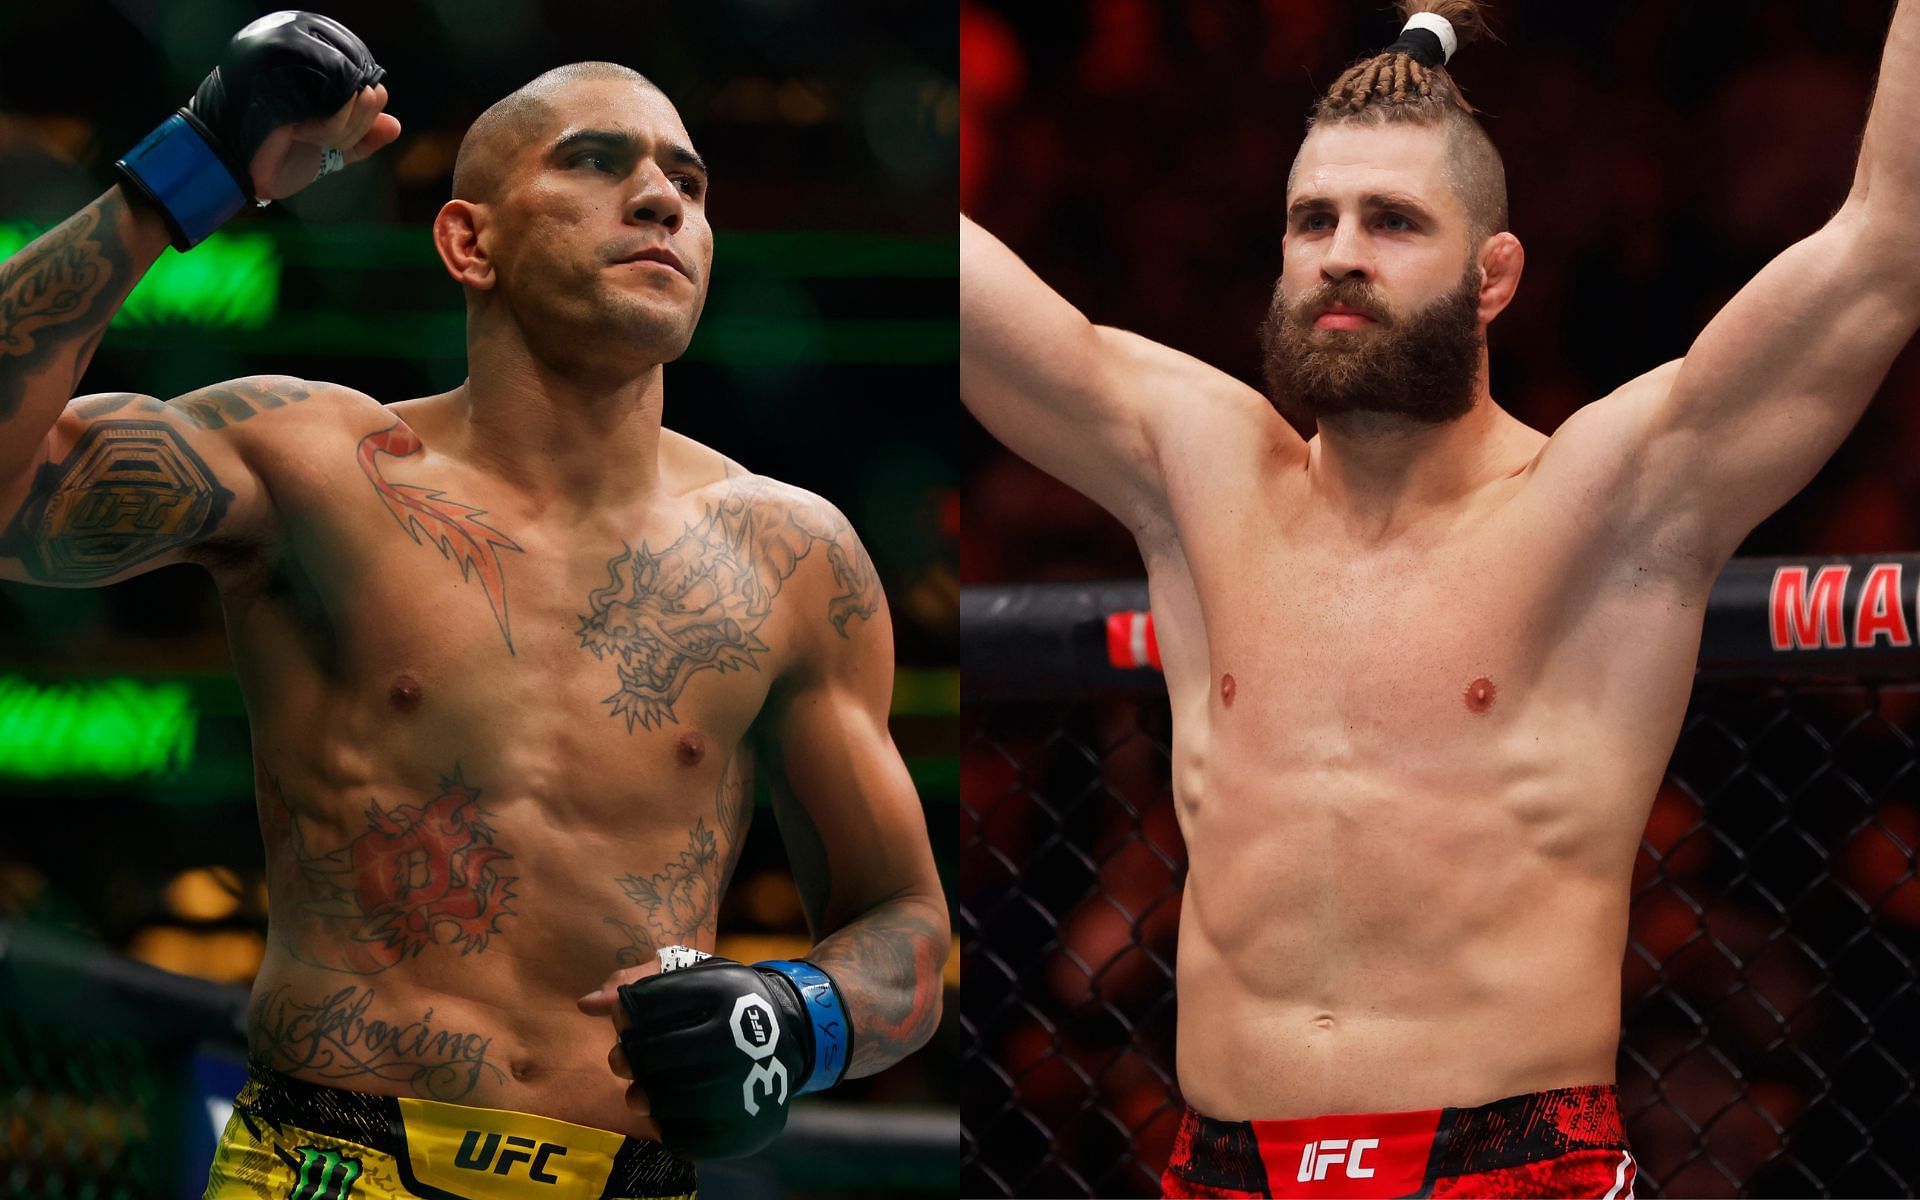 Alex Pereira (left) and Jiri Prochazka (right) will do battle for the coveted UFC light heavyweight championship at UFC 303 [Images courtesy: Getty Images]